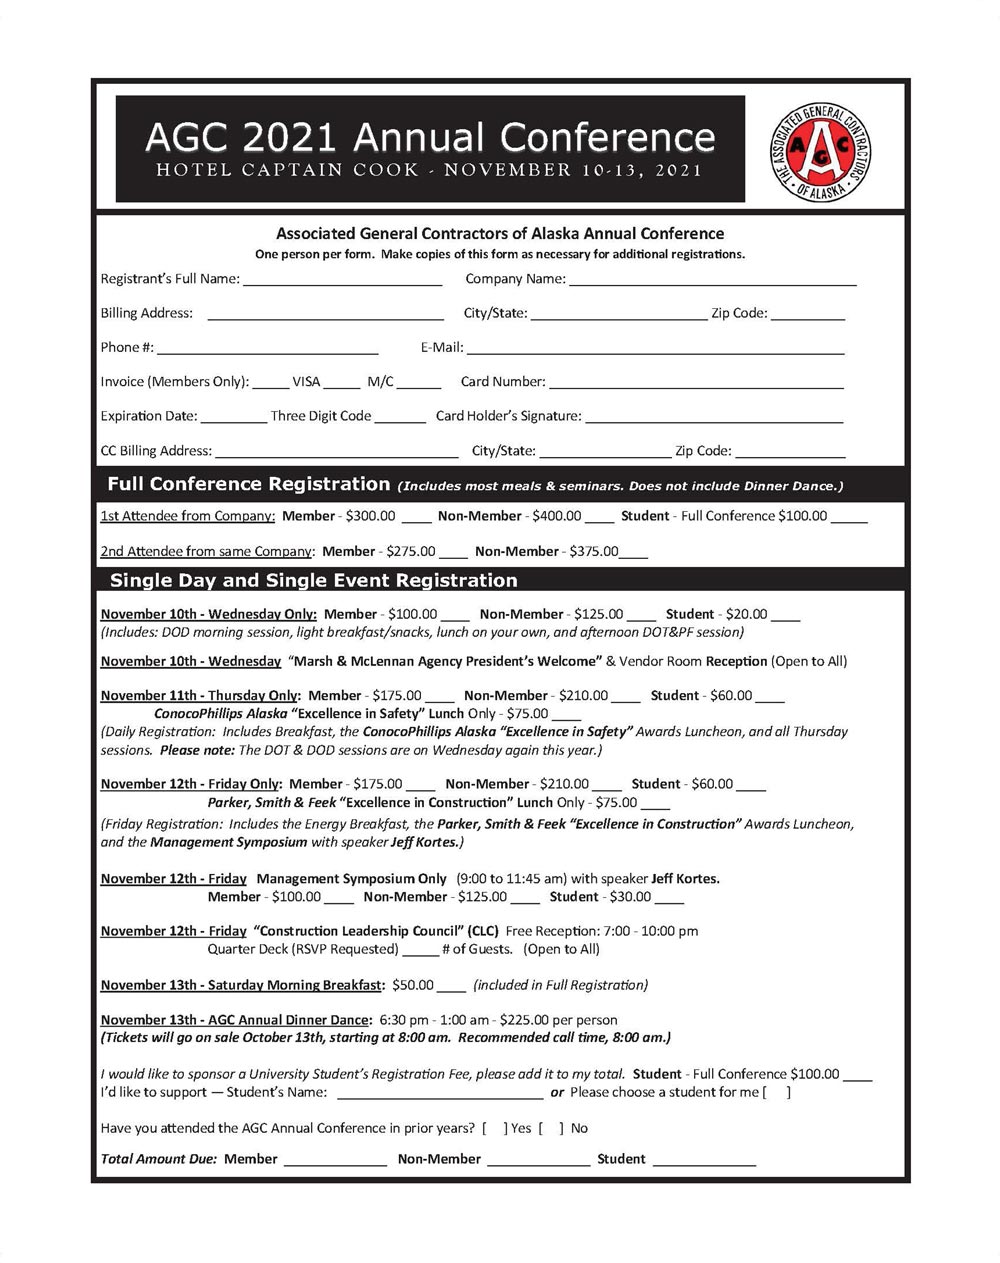 AGC 2021 Annual Conference Advertisement